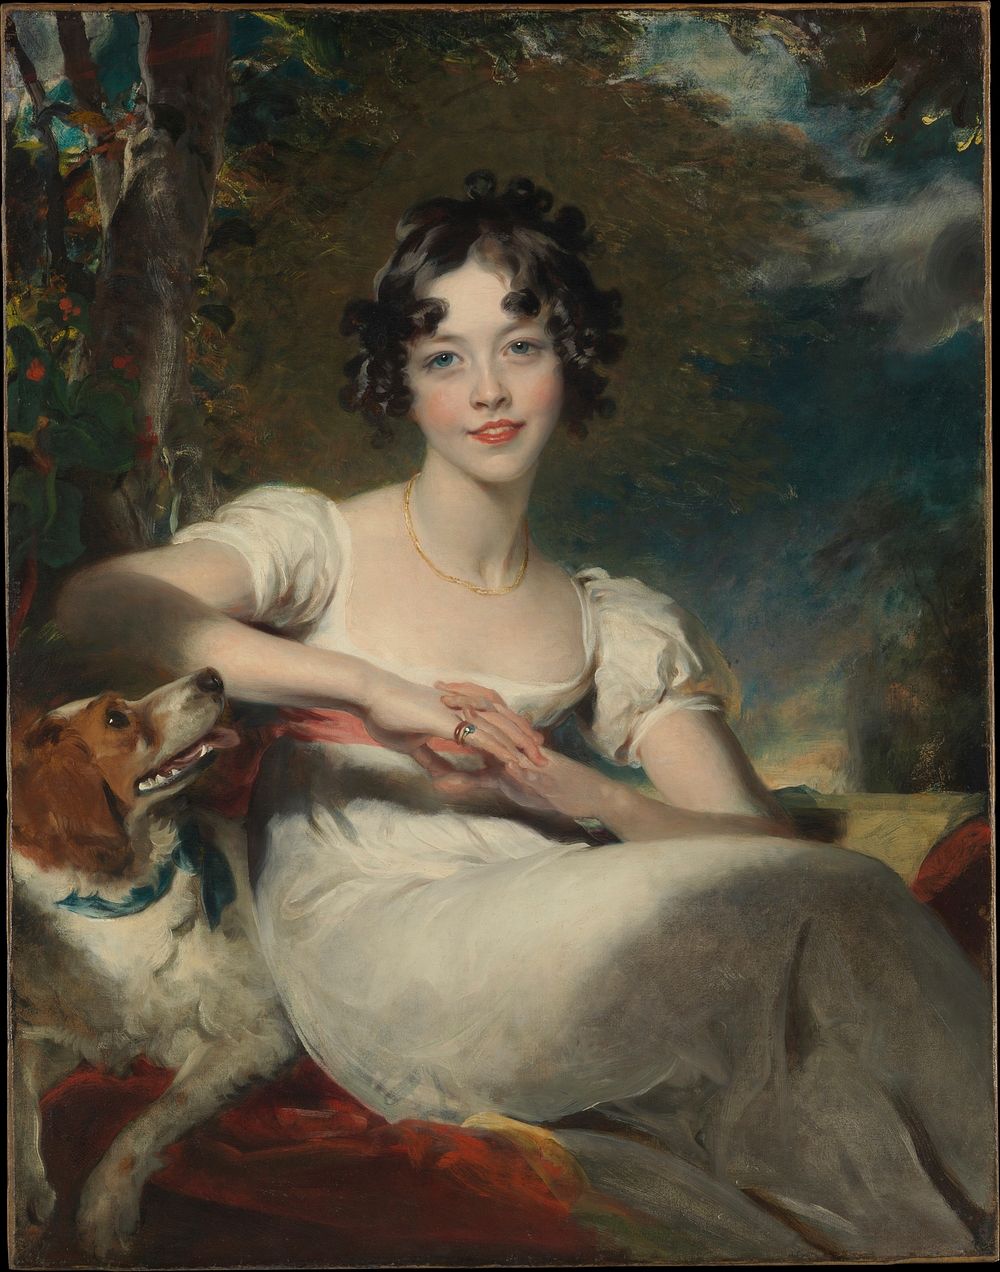 Lady Maria Conyngham (died 1843) by Sir Thomas Lawrence